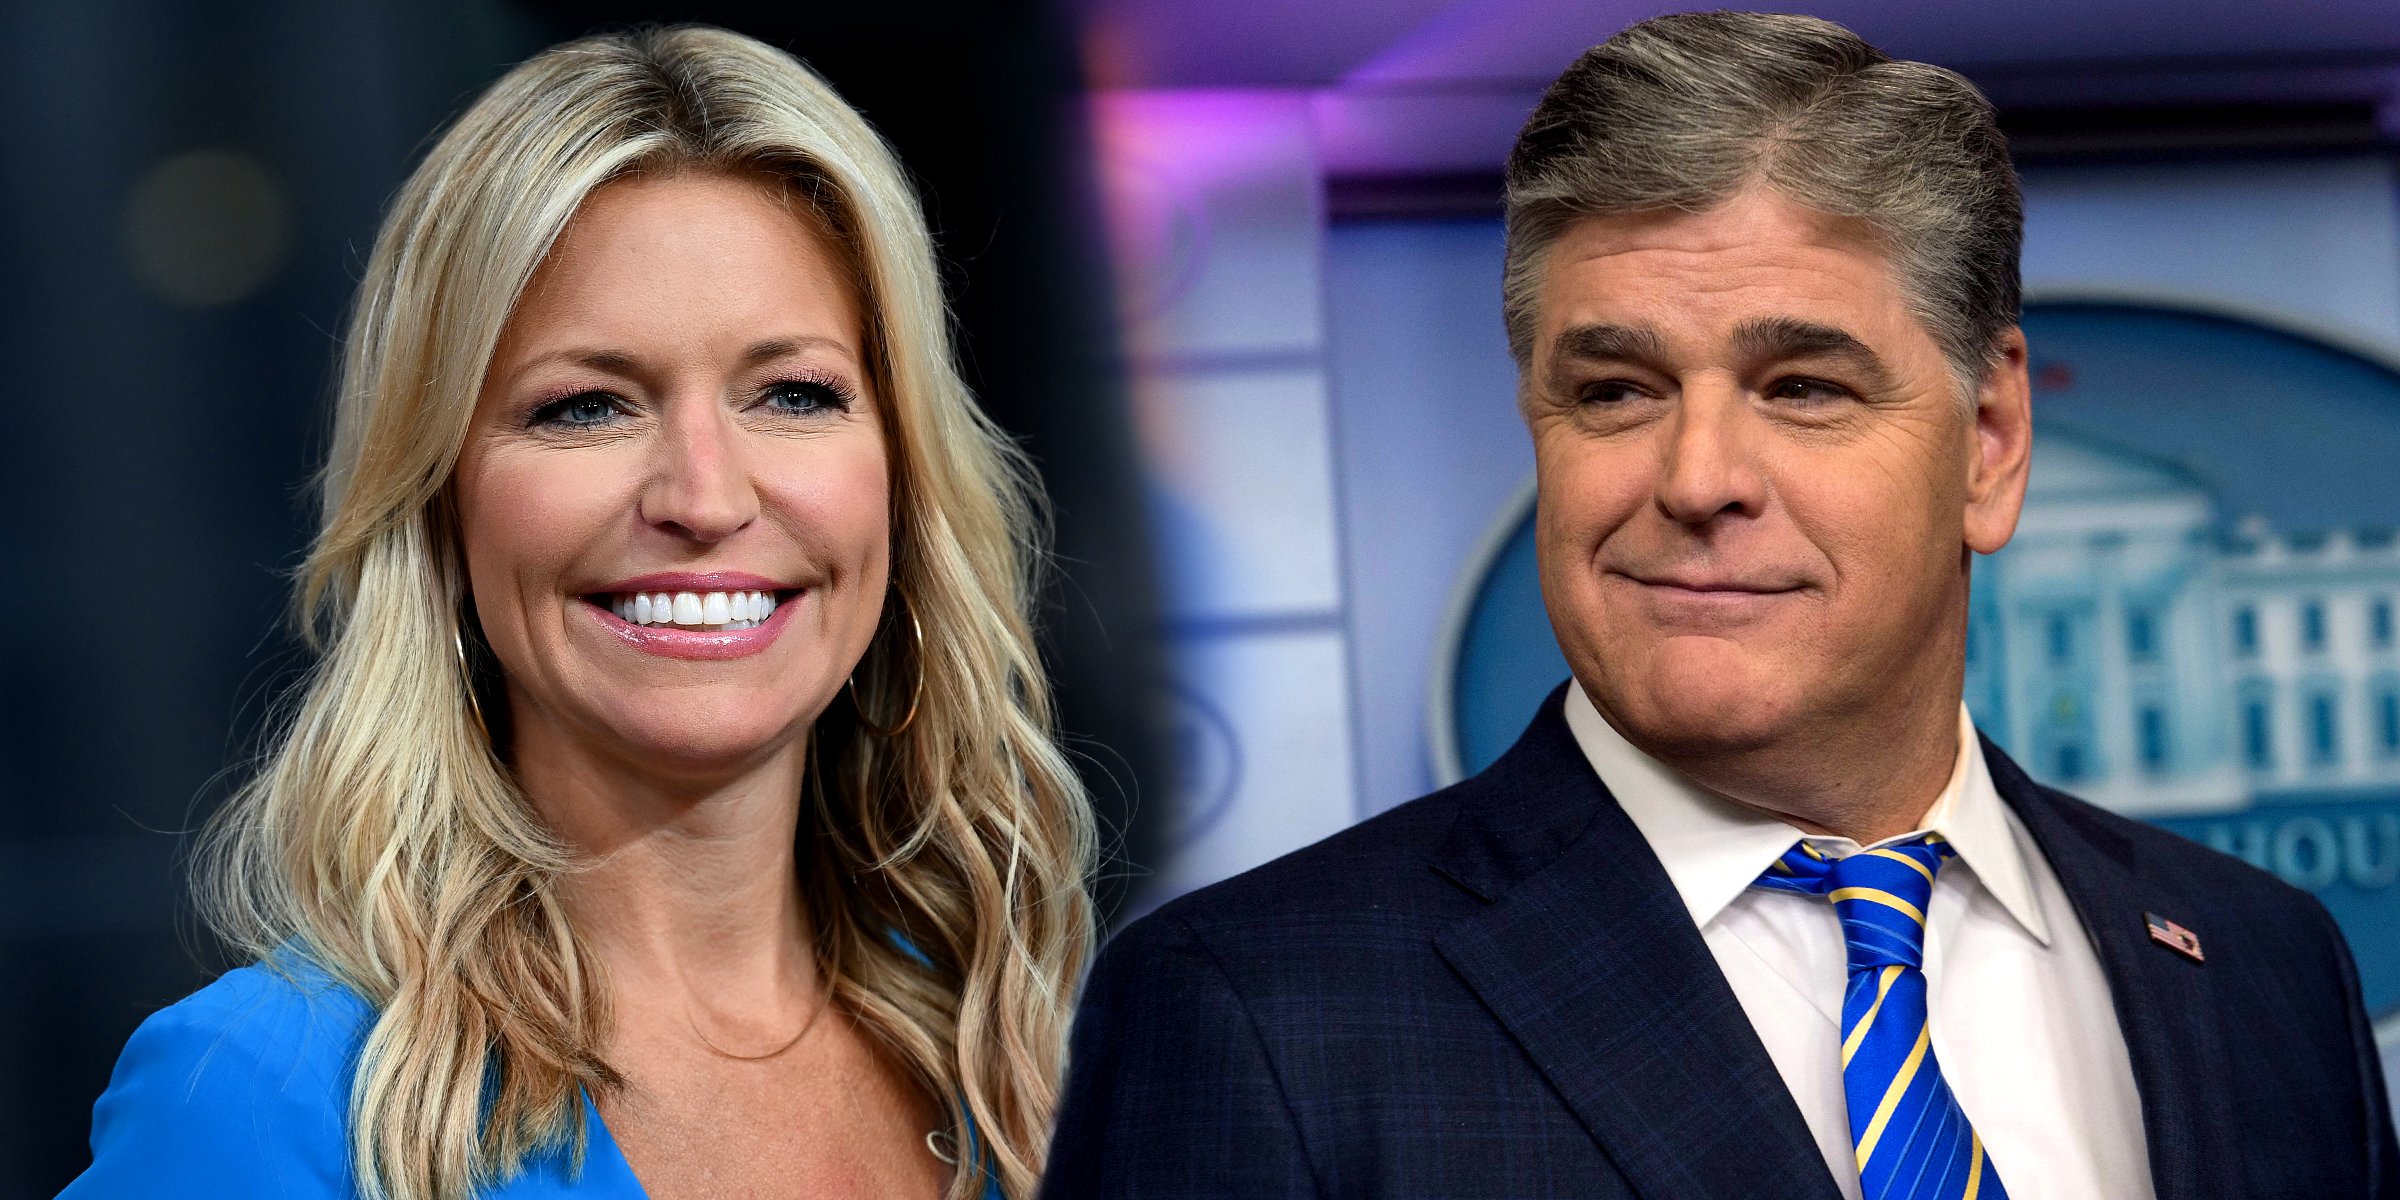 Ainsley Earhardt and Sean Hannity | Source: Getty Images